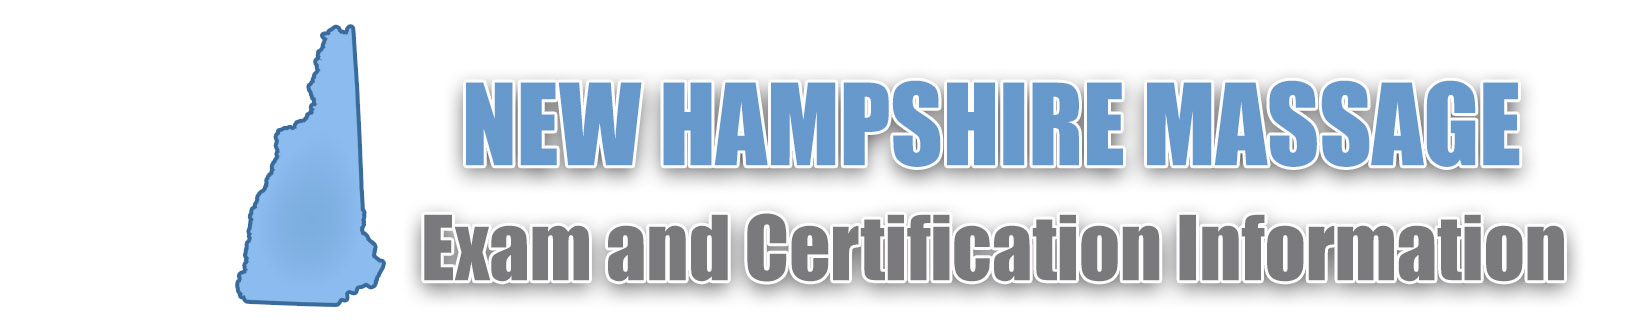 New Hampshire MBLEX Massage Exam and Certification Information